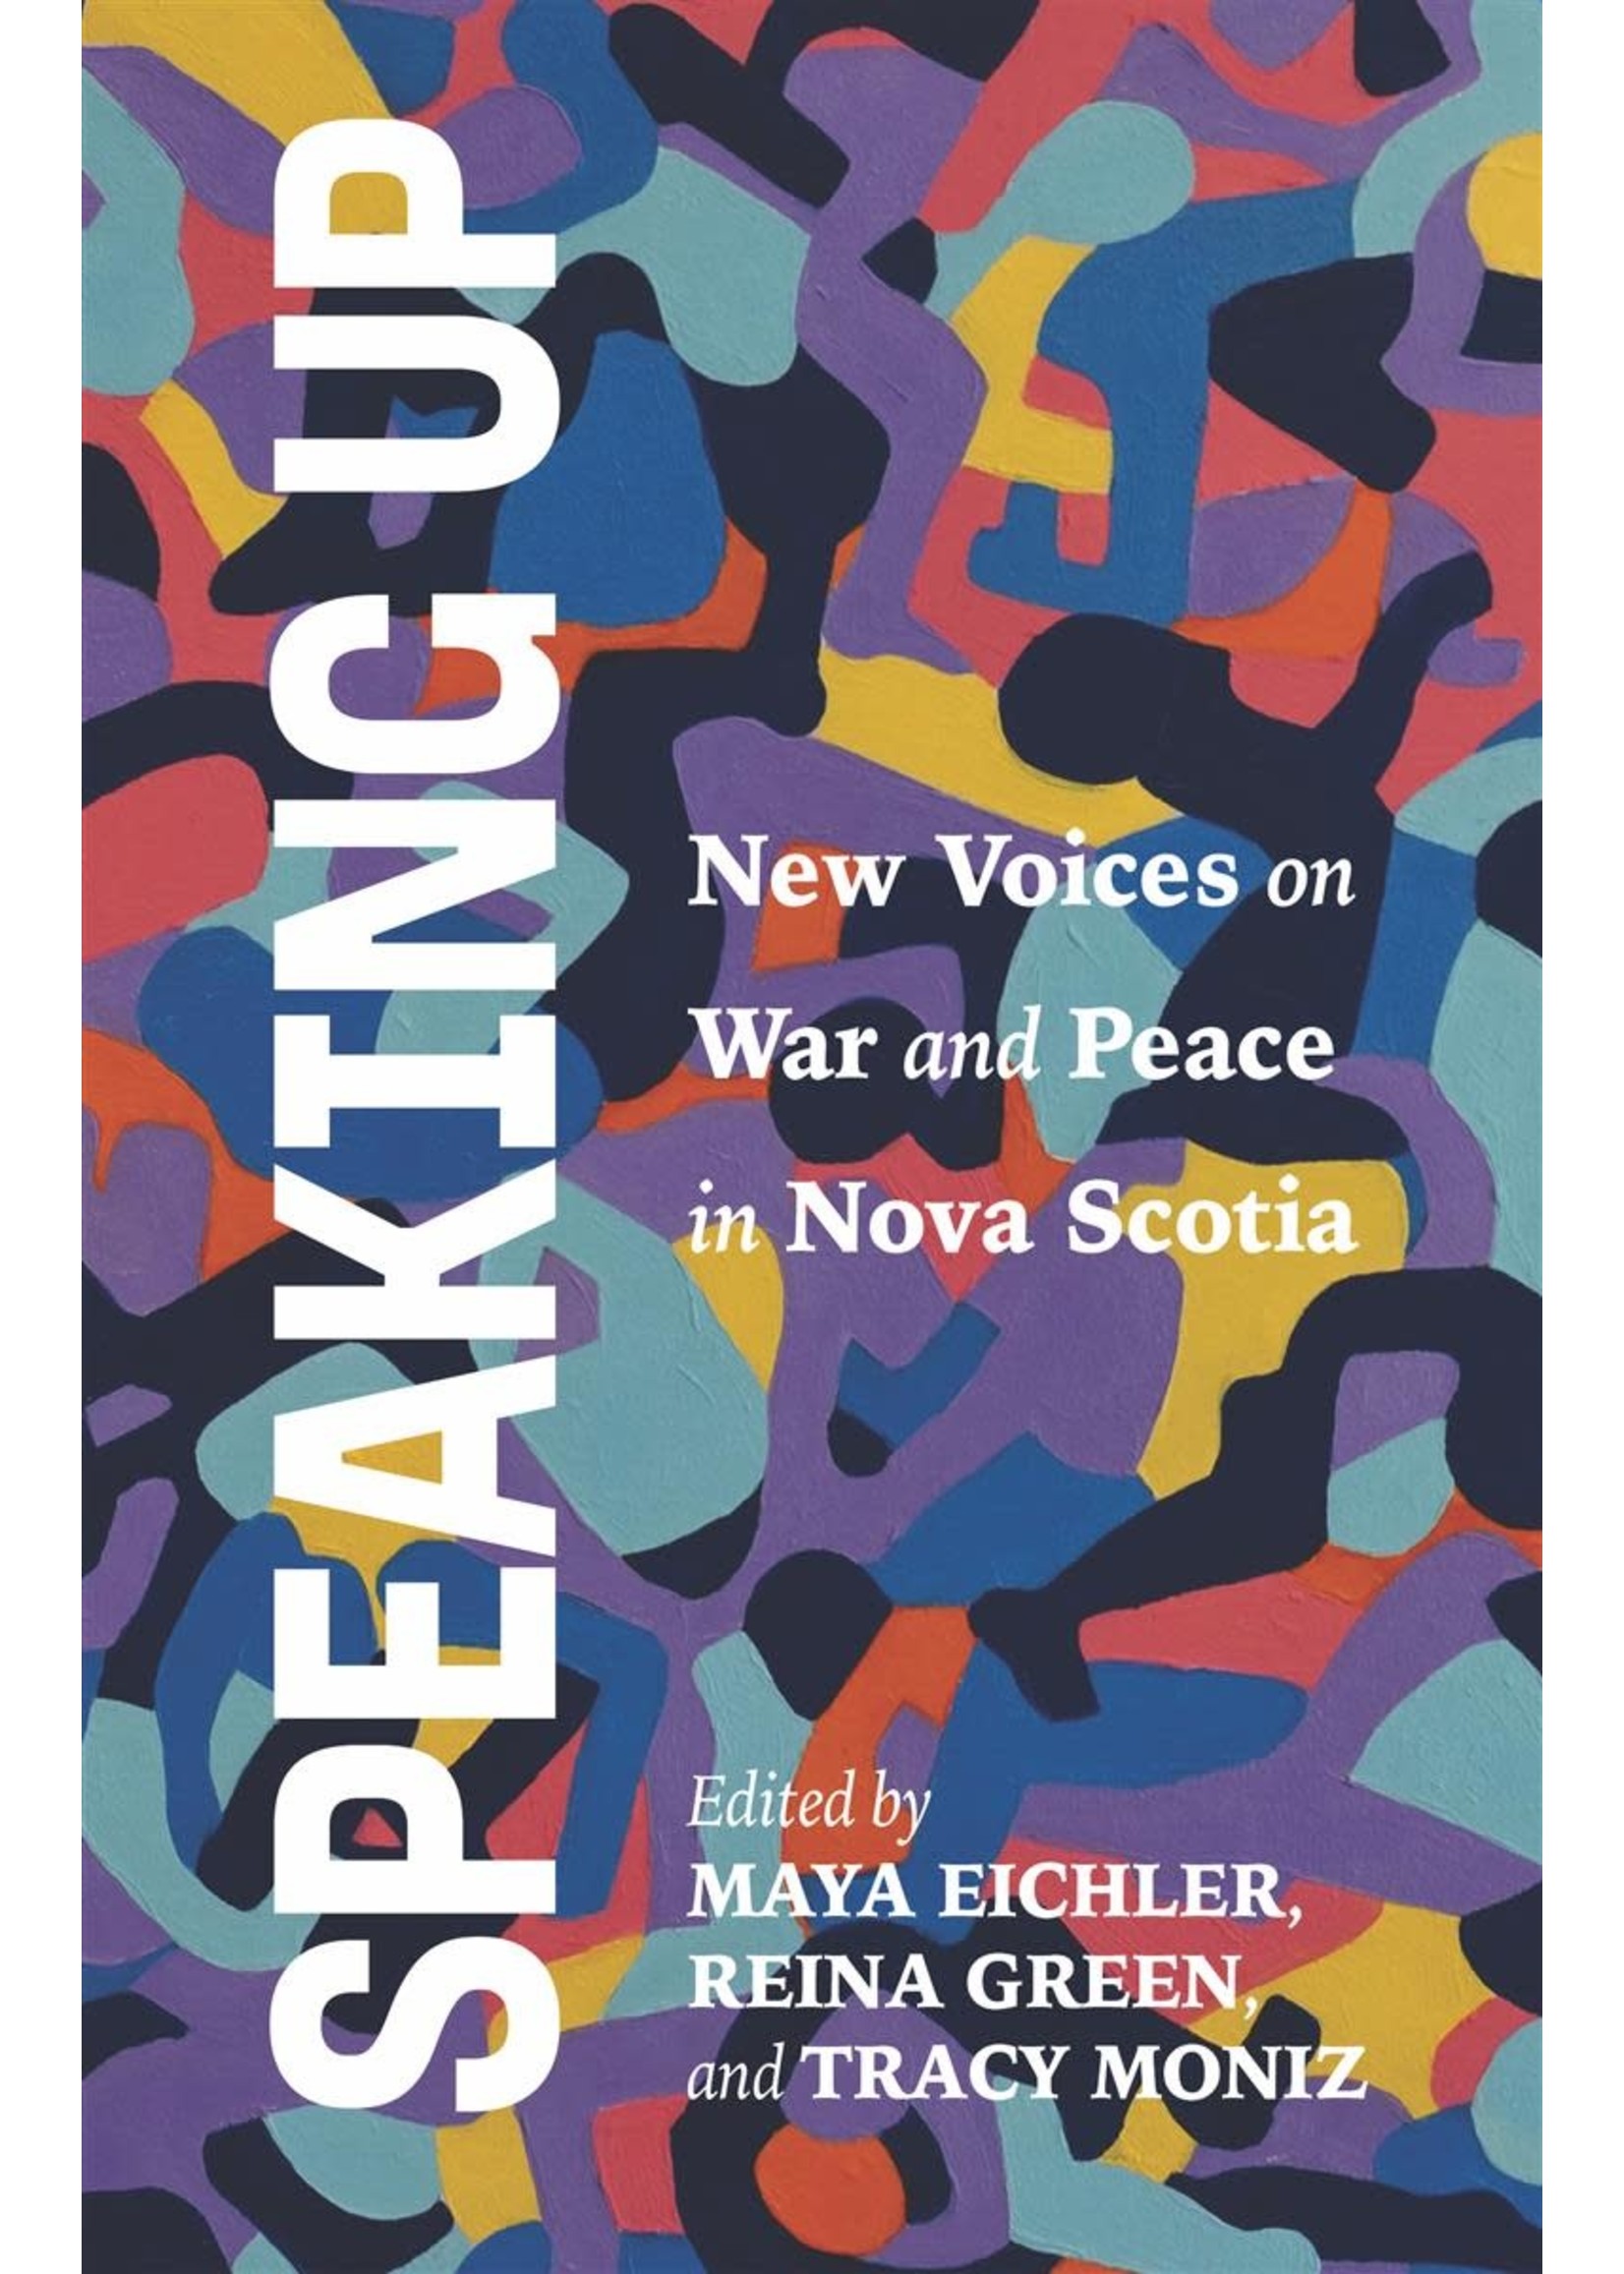 Speaking Up: New Voices on War and Peace in Nova Scotia Edited by Maya Eichler, Reina Green, Tracy Moniz